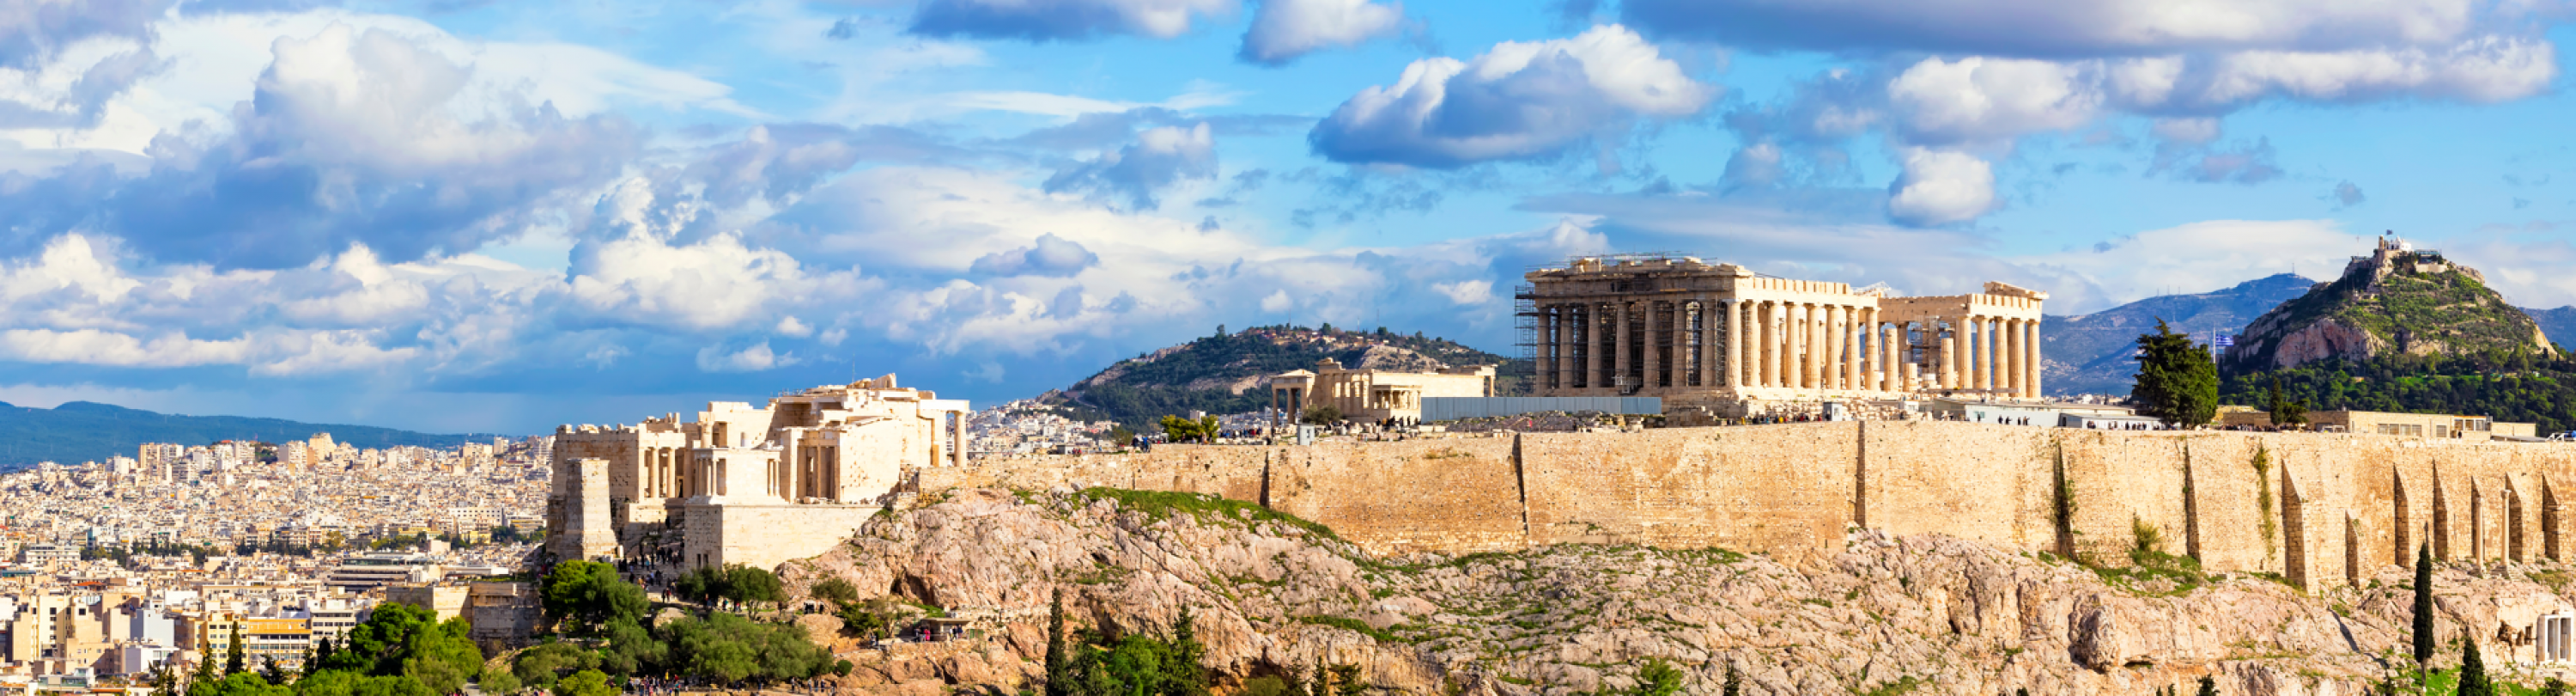 4th Open Scientific Conference, Athens